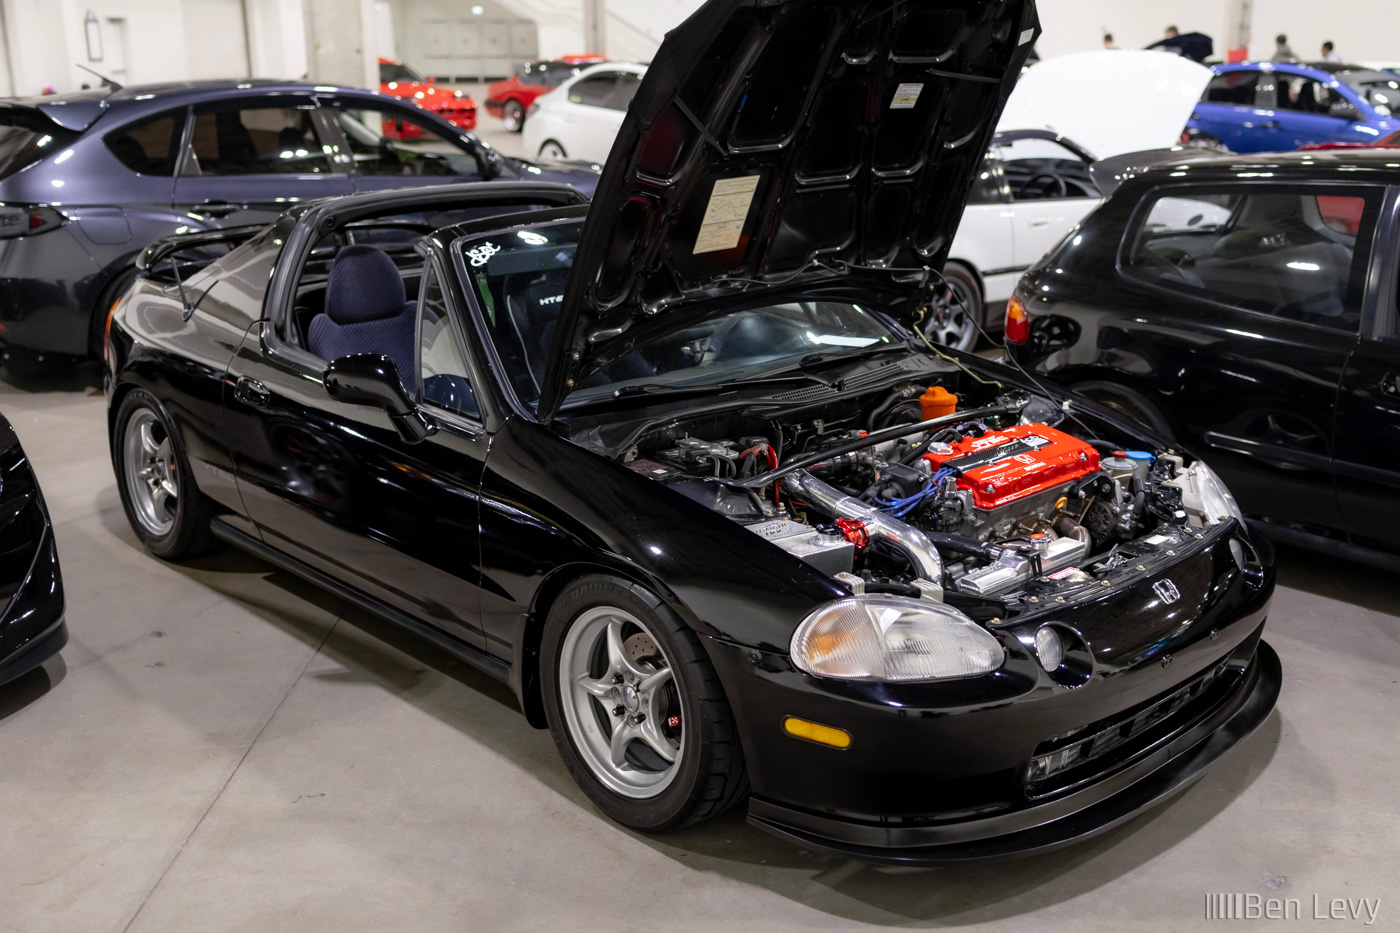 Turbocharged Honda del Sol at Wekfest Chicago